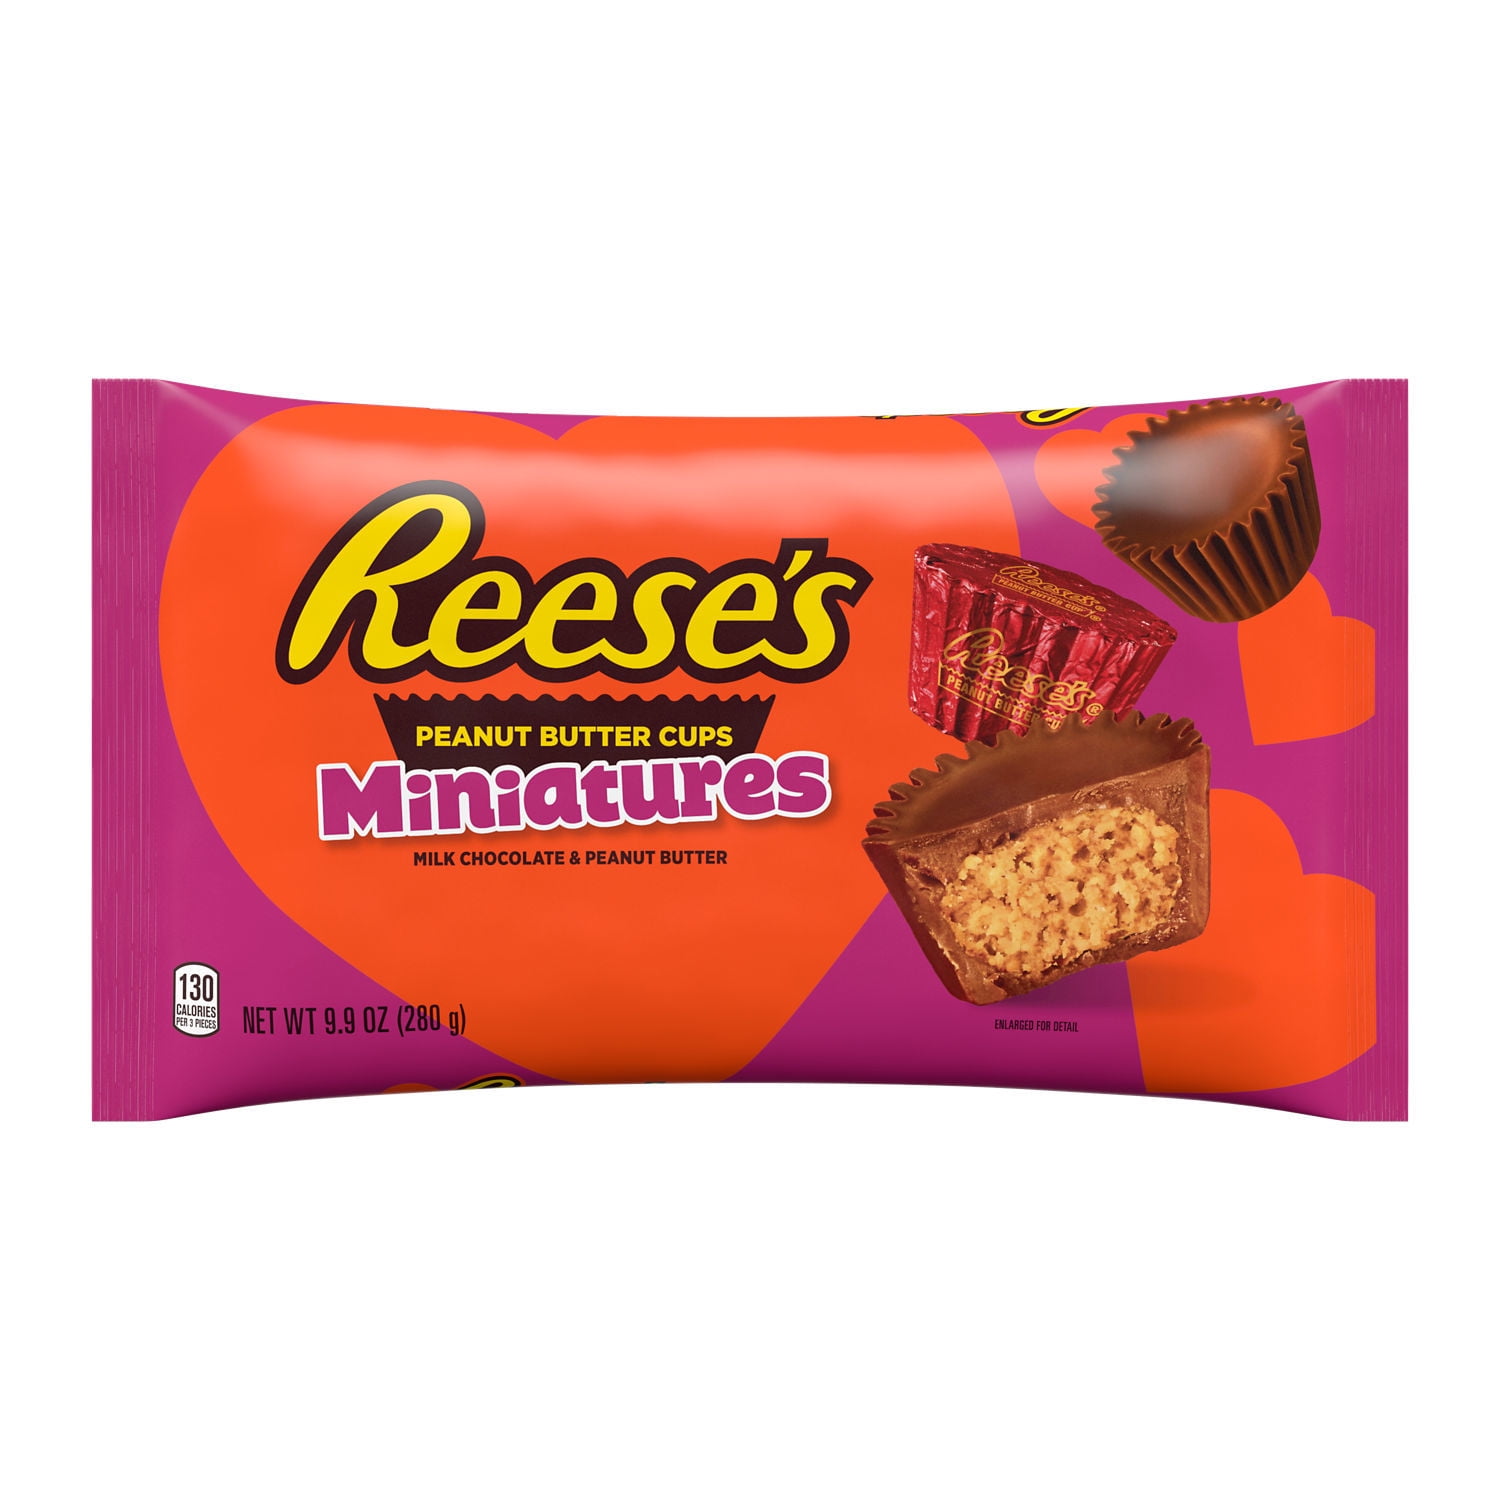 REESE'S, Miniatures Milk Chocolate Peanut Butter Cups Candy, Valentine's Day, 9.9 oz, Bag